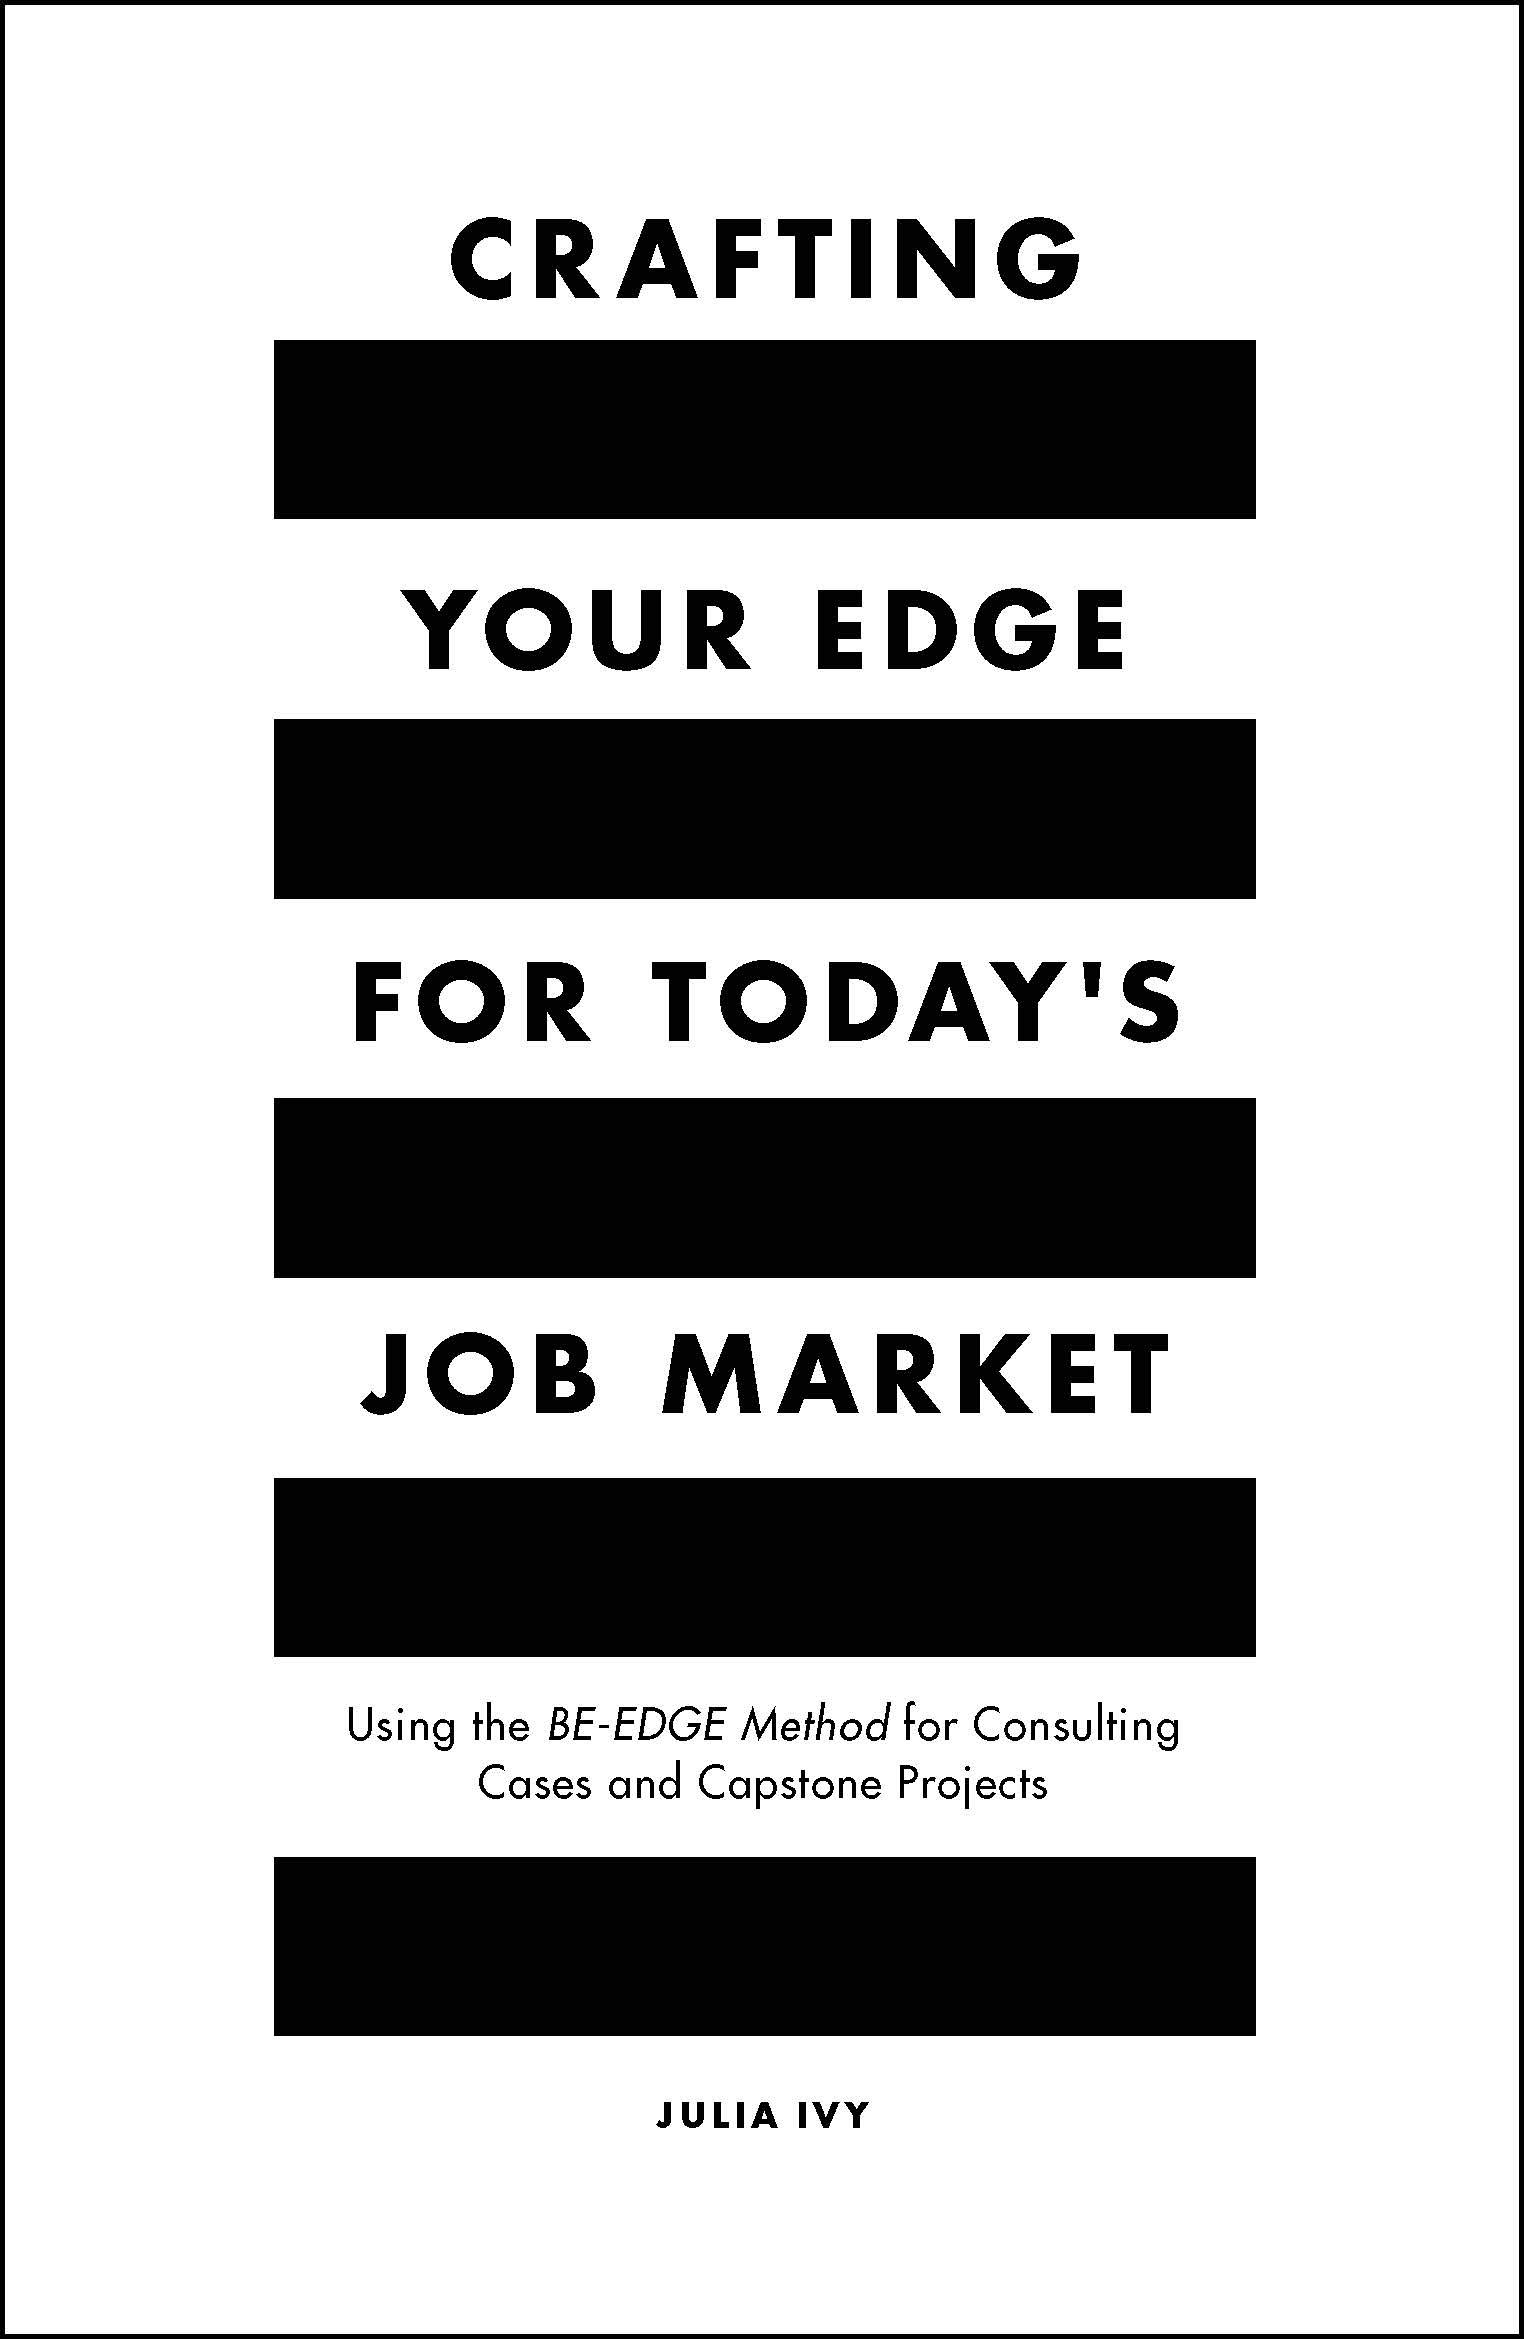 Crafting Your Edge for Today's Job Market: Using the Be-edge Method for Consulting Cases and Capstone Projects